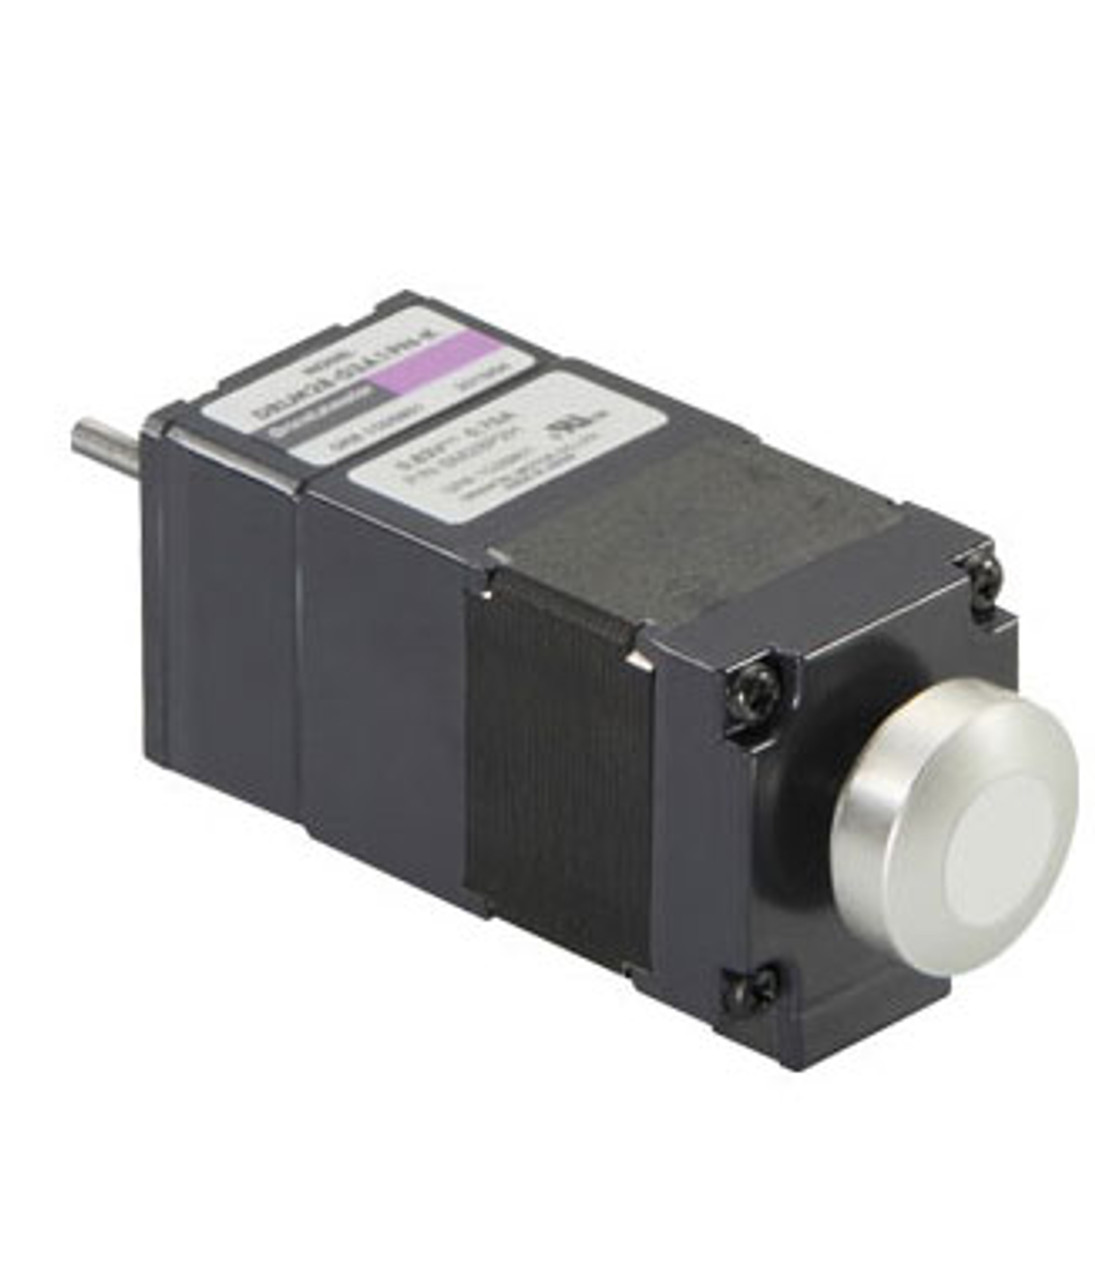 DRLM28-03A1PN-K - Product Image